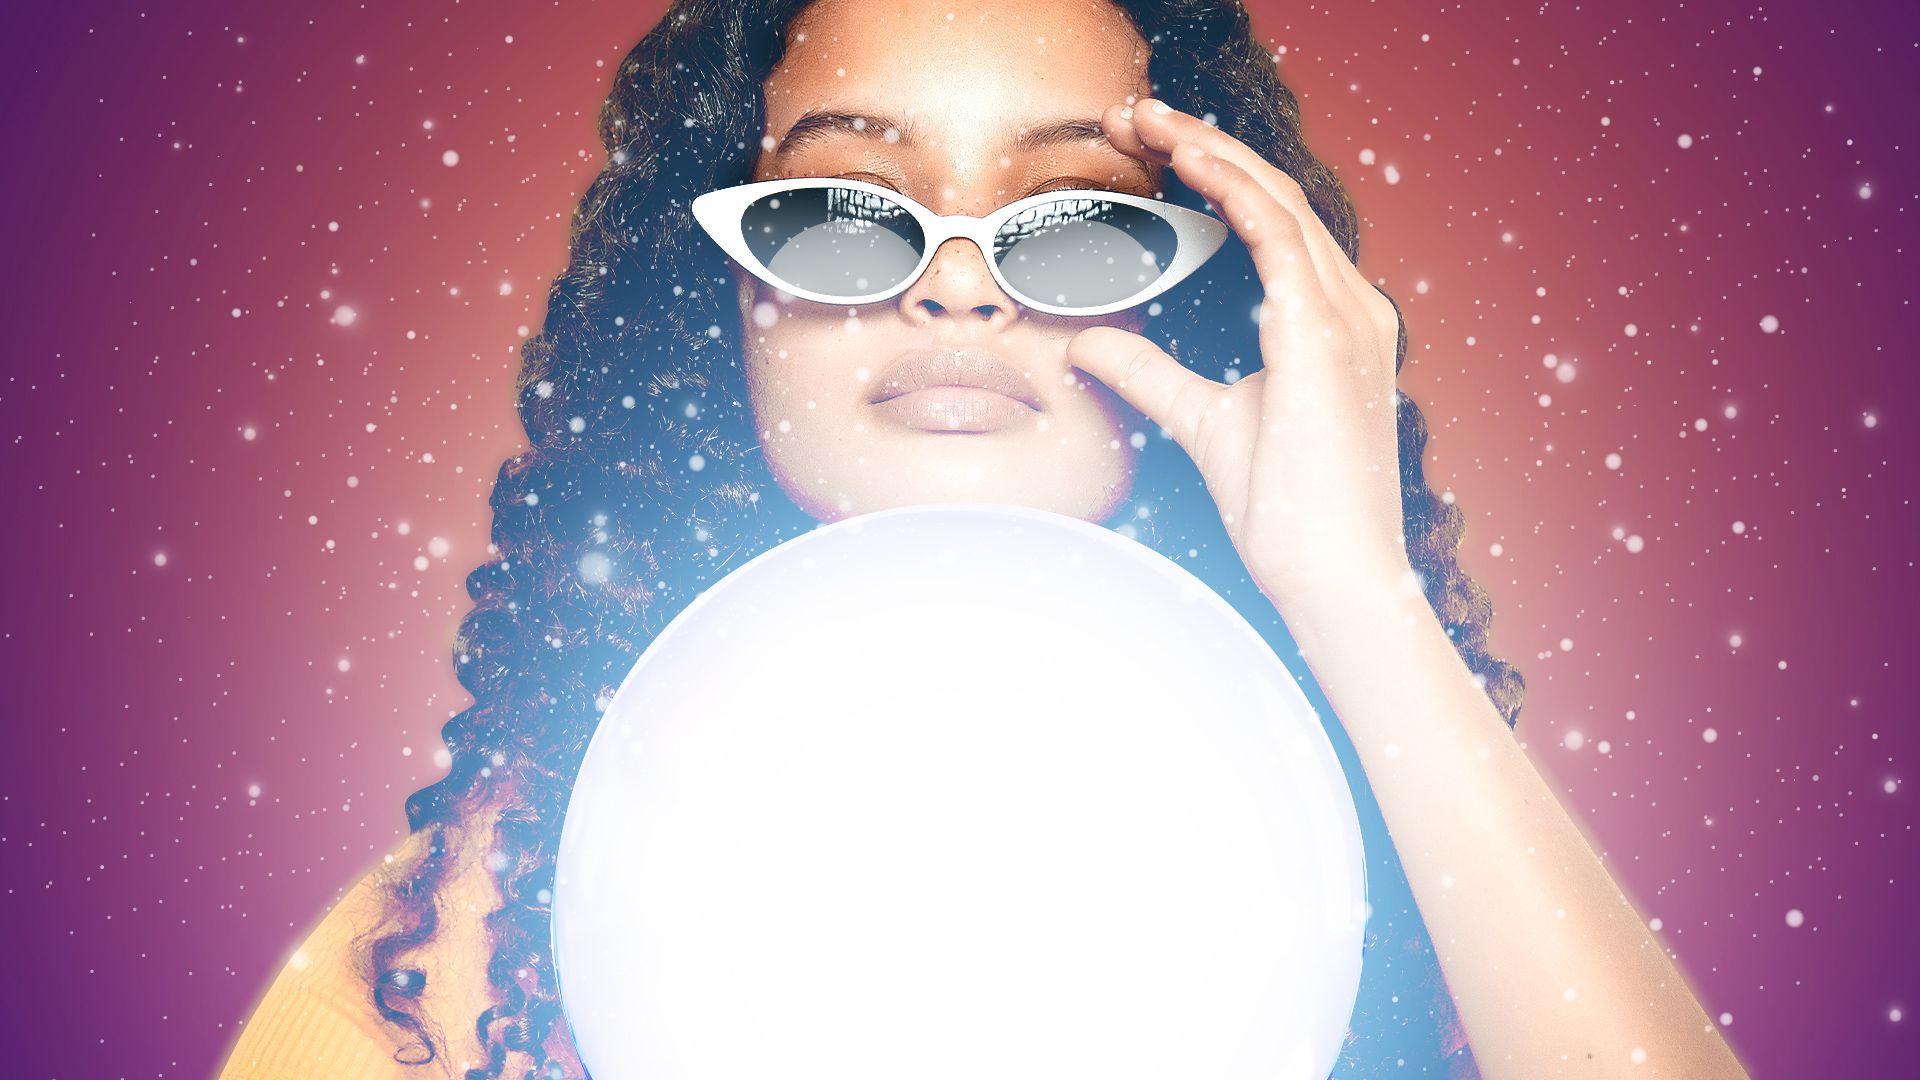 Illustration of a Gen Z person wearing sunglasses looking into a blindingly bright crystal ball. 